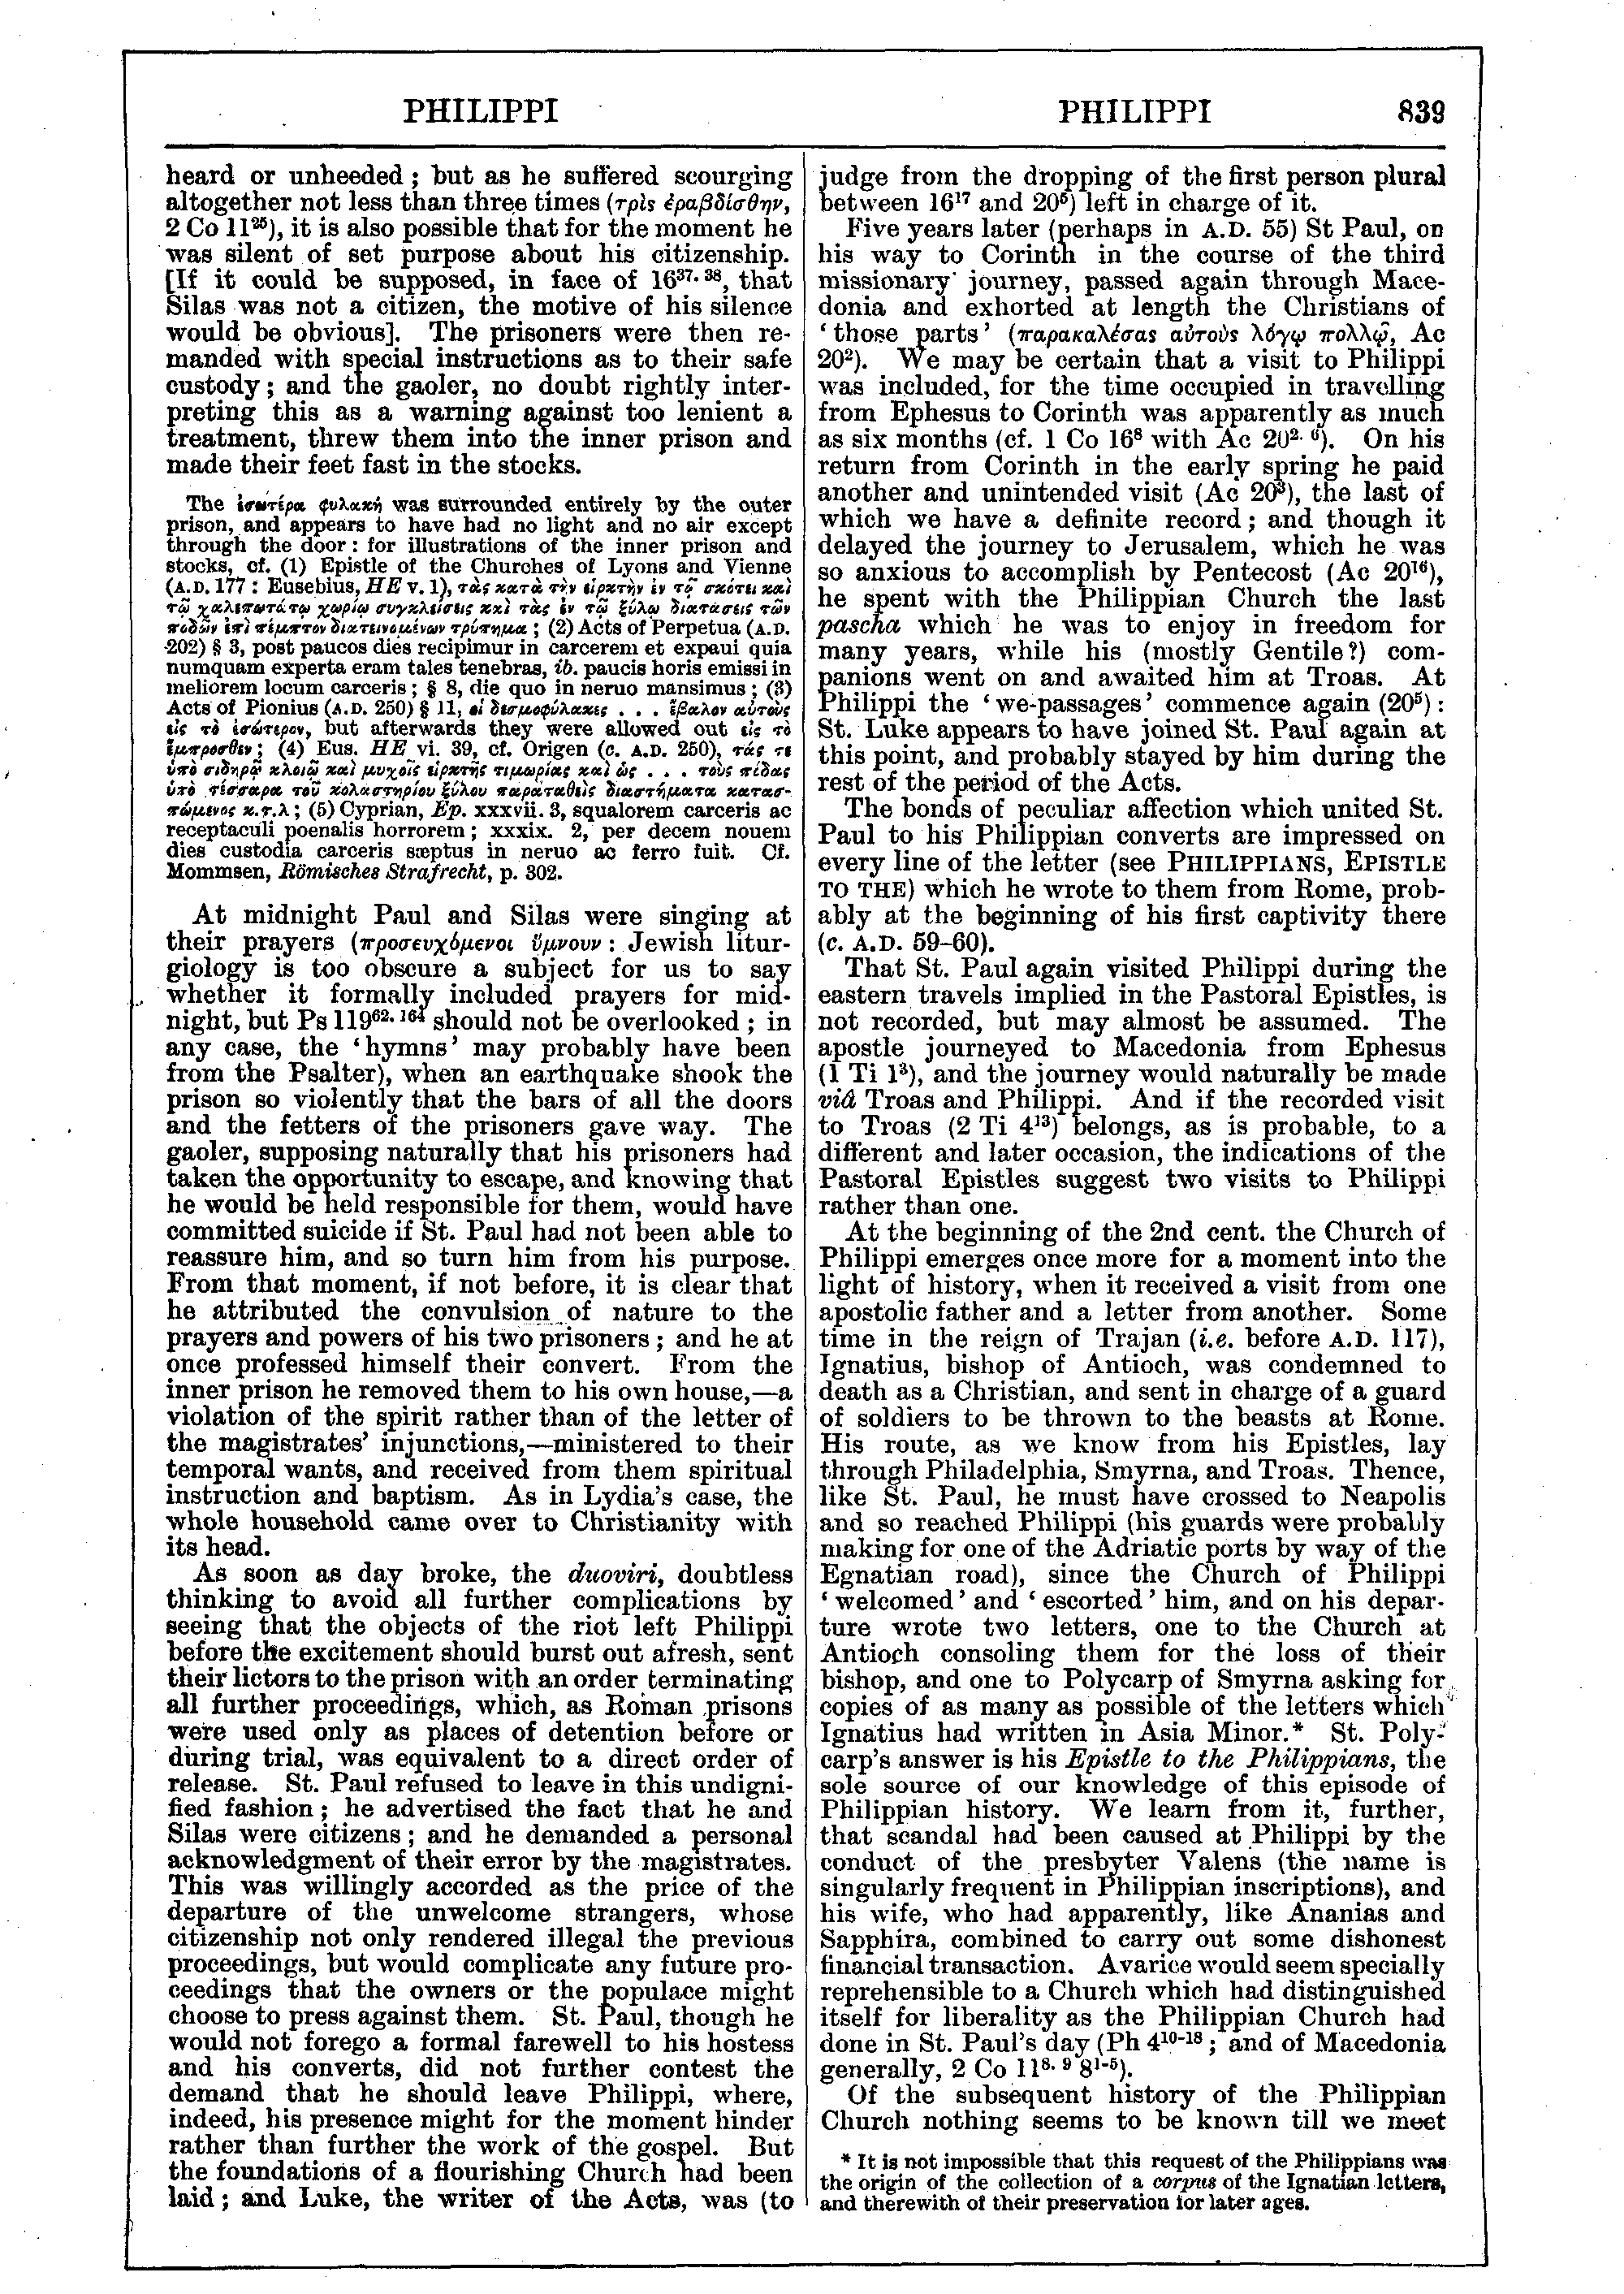 Image of page 839